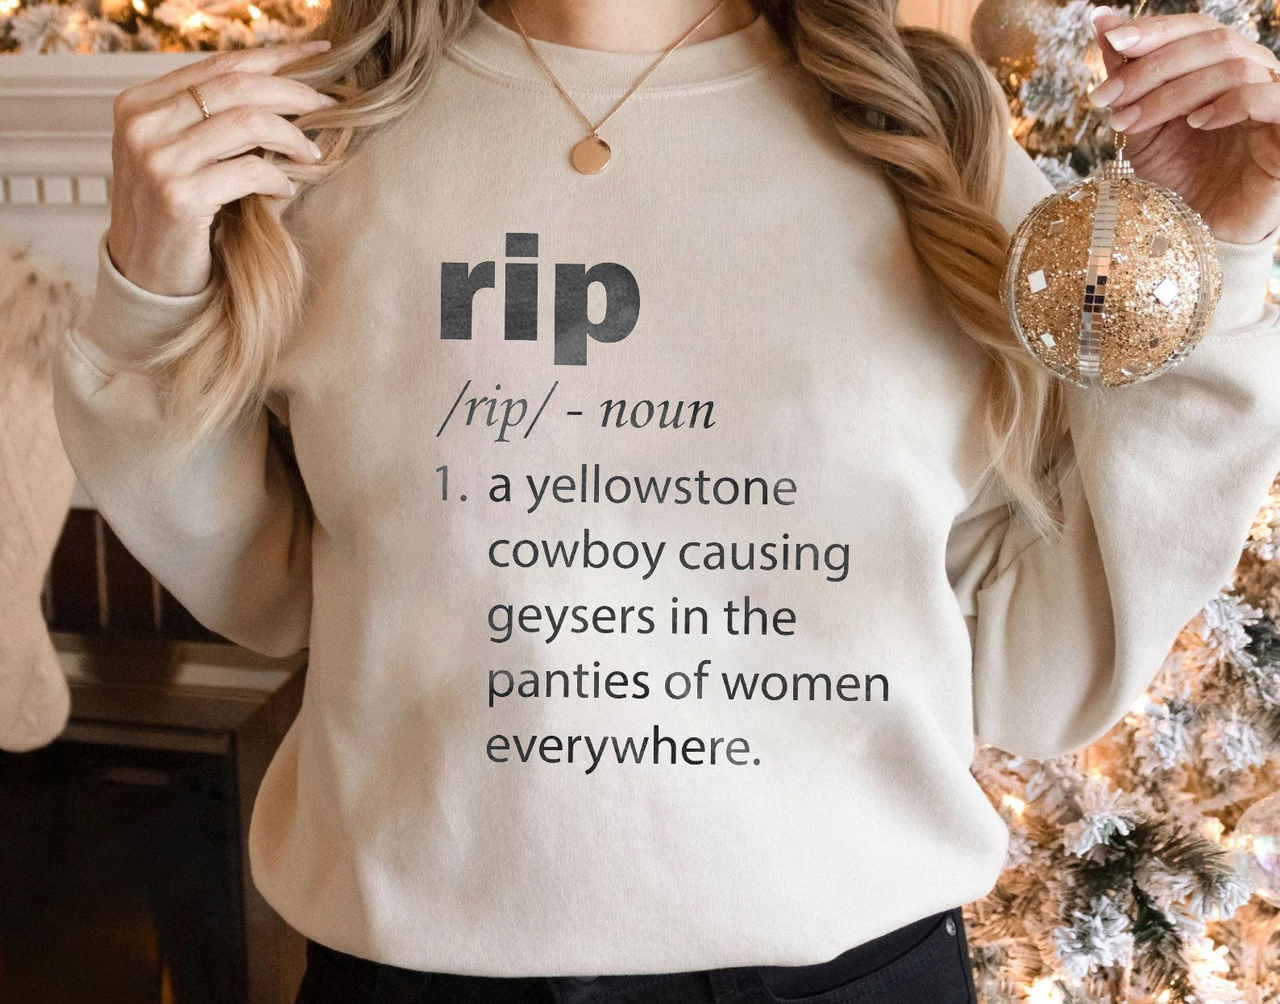 How To Look For A reliable Yellowstone Rip T-shirt Wholesaler